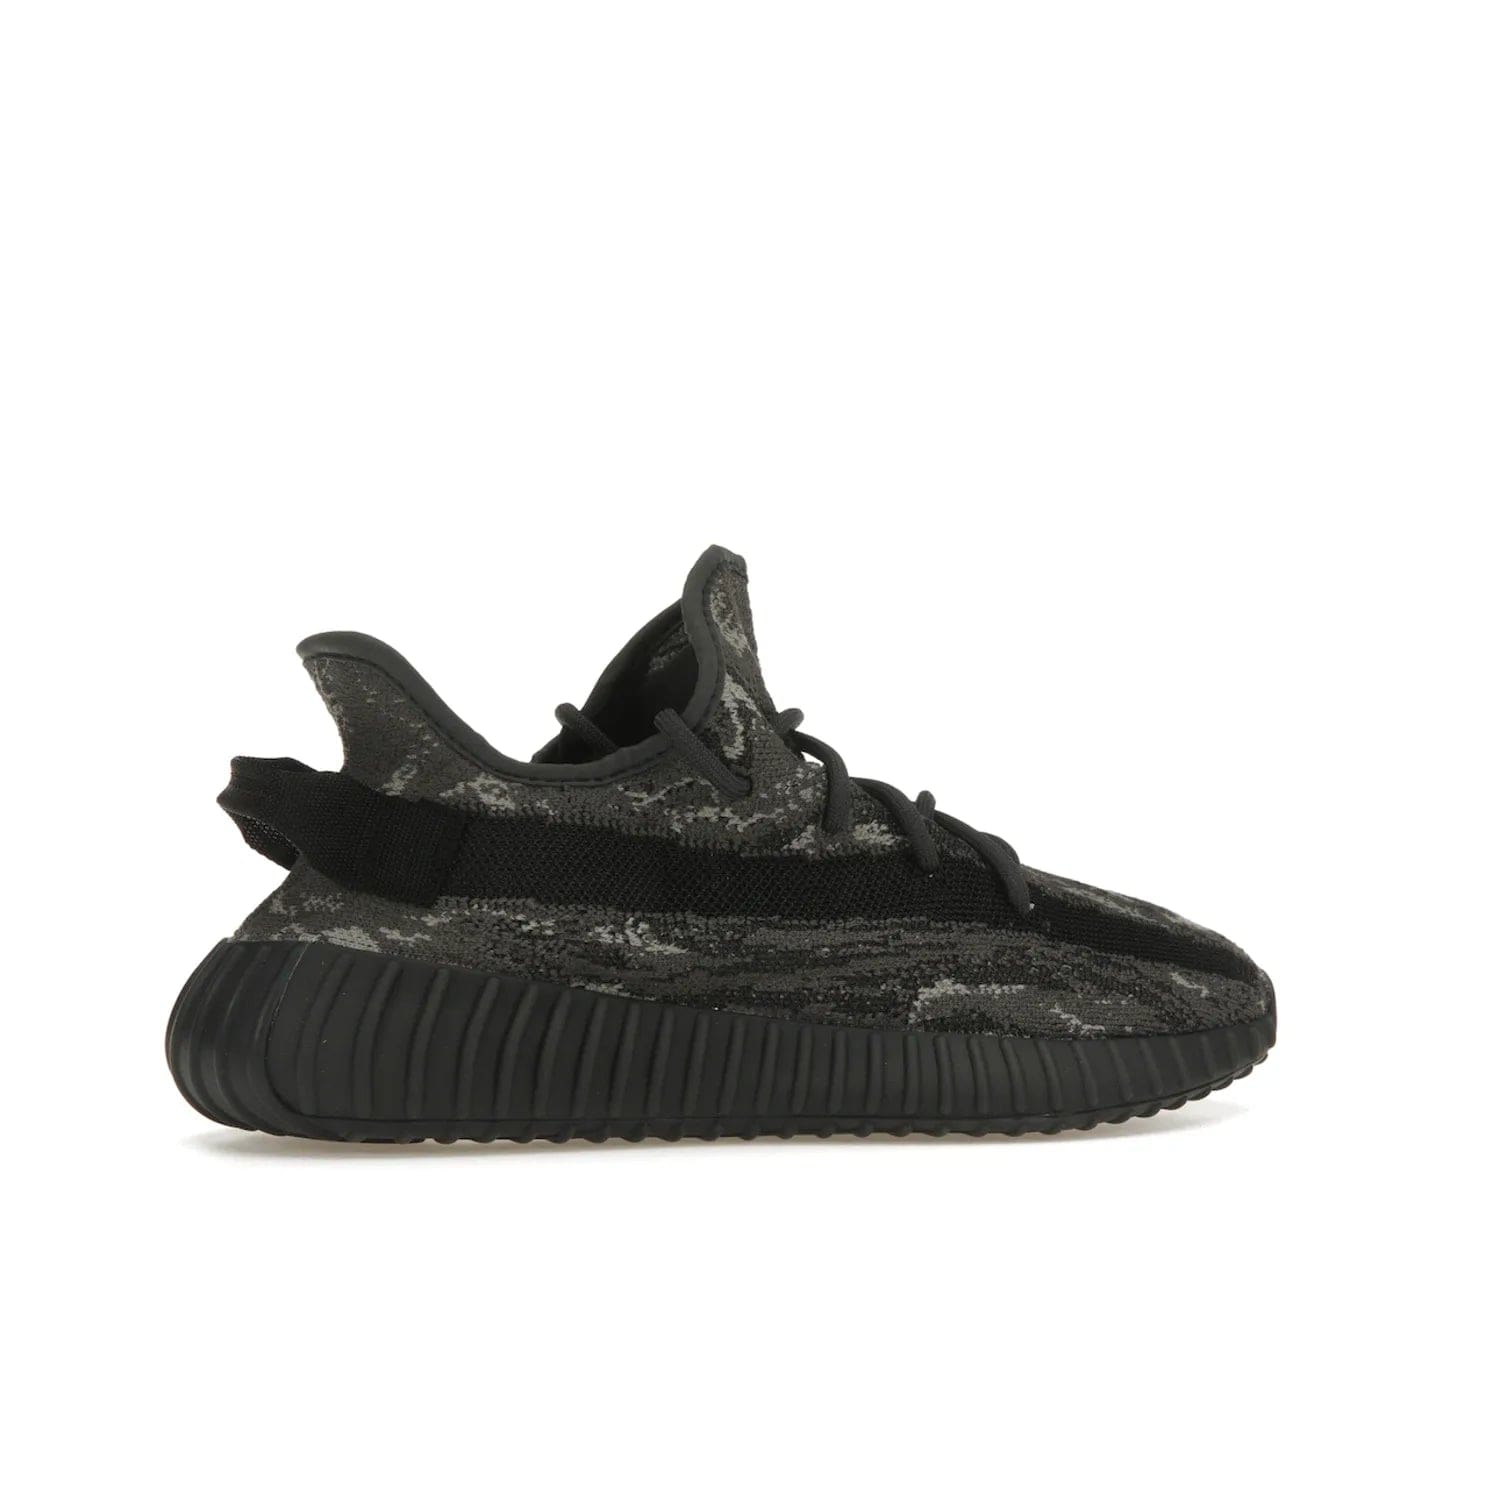 adidas Yeezy Boost 350 V2 MX Dark Salt - Image 35 - Only at www.BallersClubKickz.com - ##
The adidas Yeezy Boost 350 V2 MX Dark Salt offers a contemporary look with a signature combination of grey and black hues. Cushioned Boost midsole and side stripe allow for all day wear. Get the perfect fashion-forward addition with this sleek sneaker for $230.